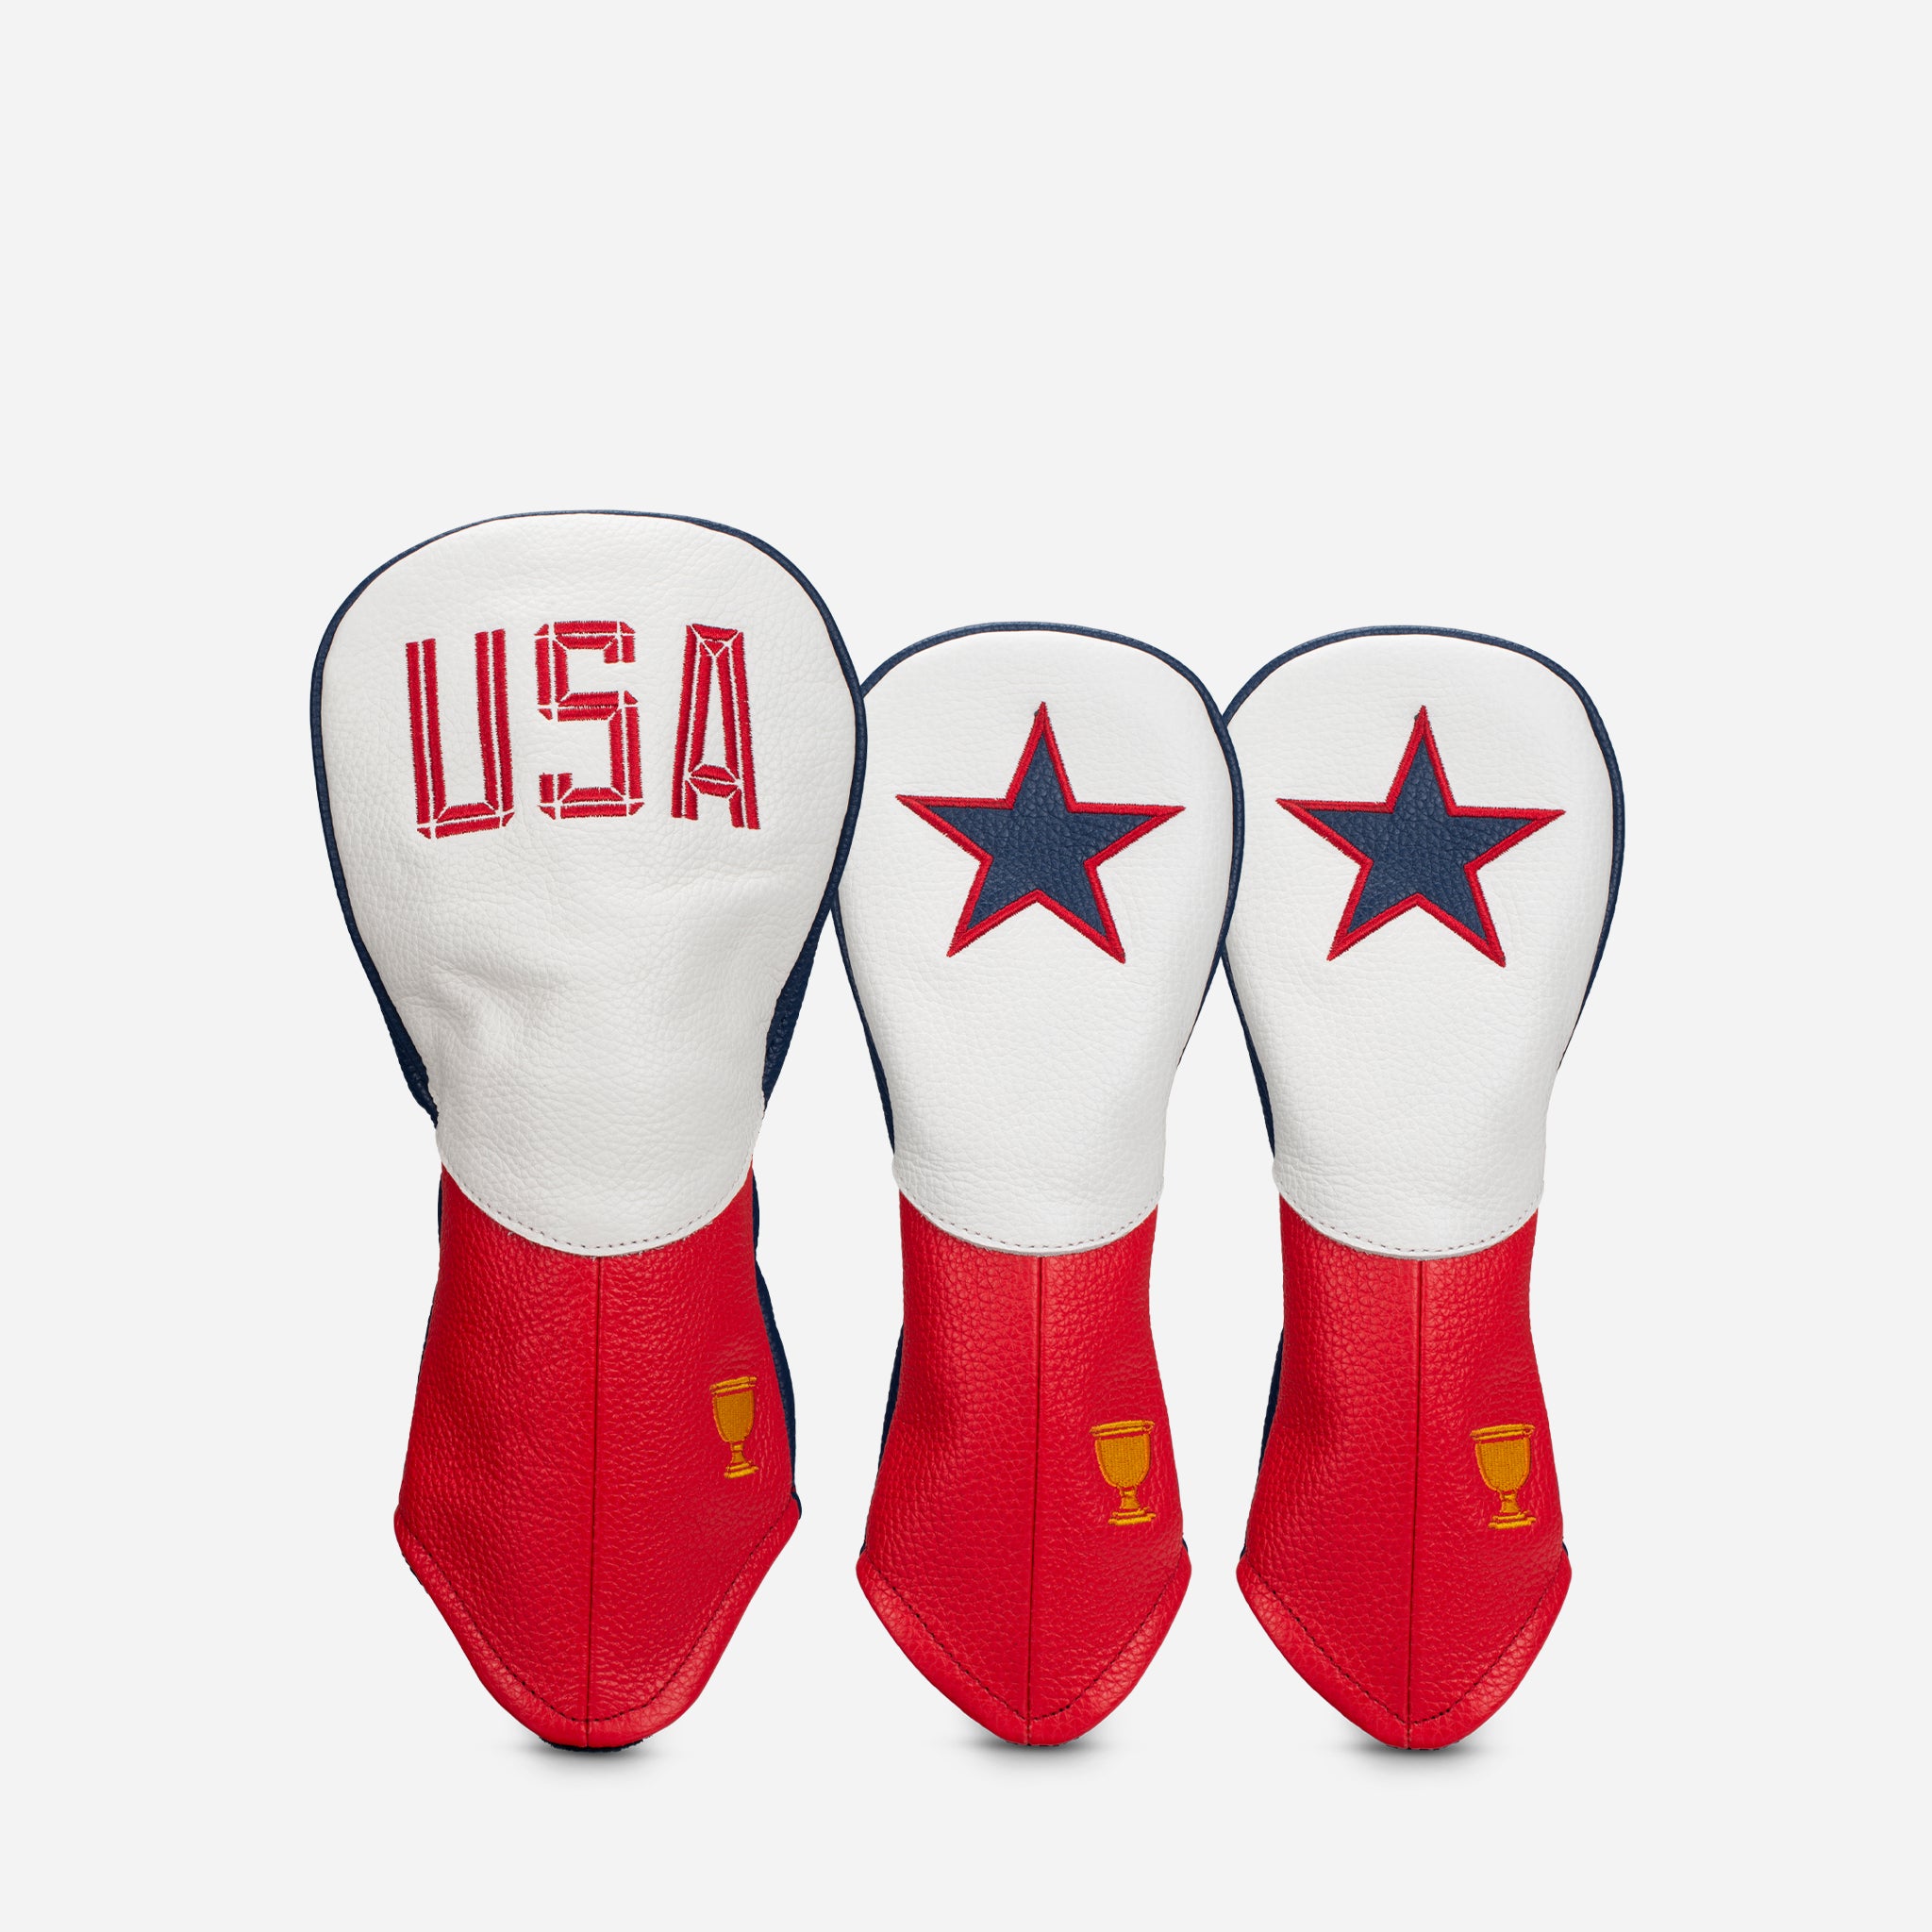 Presidents Cup USA Headcover Set   Golf Headcovers